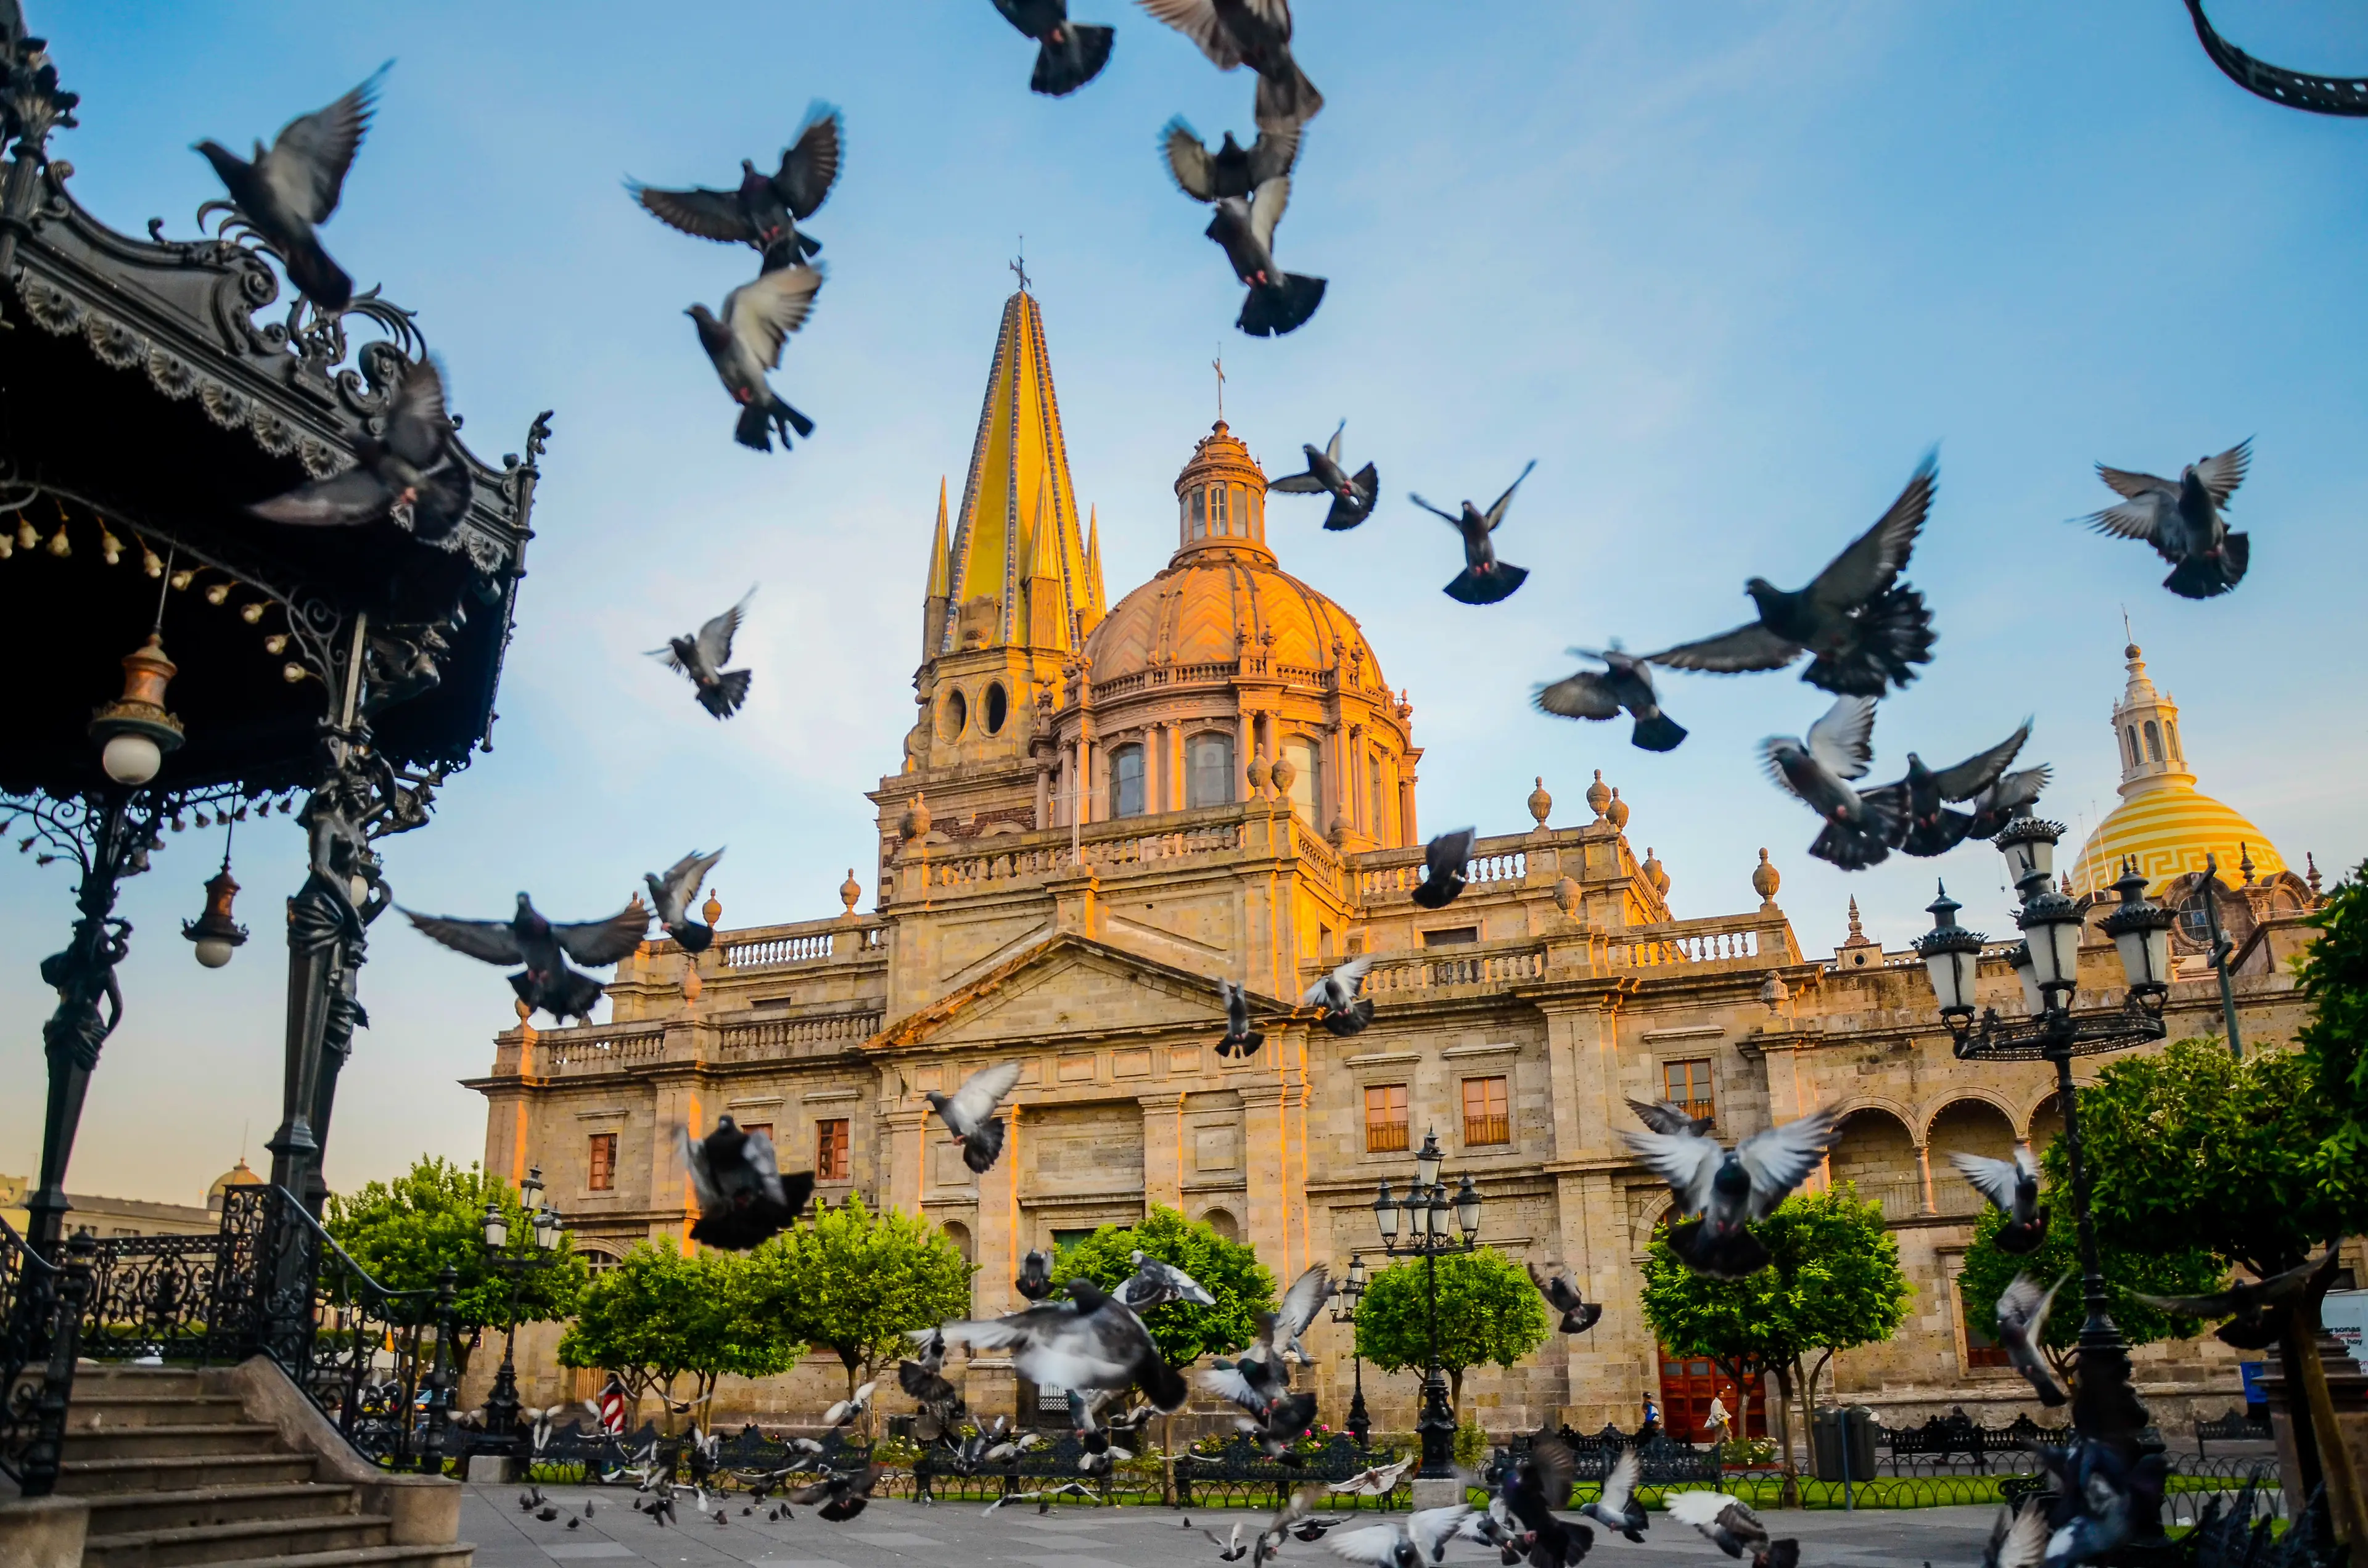 2-Day Guadalajara Hidden Gems Tour for Couples: Food, Wine, Relaxation